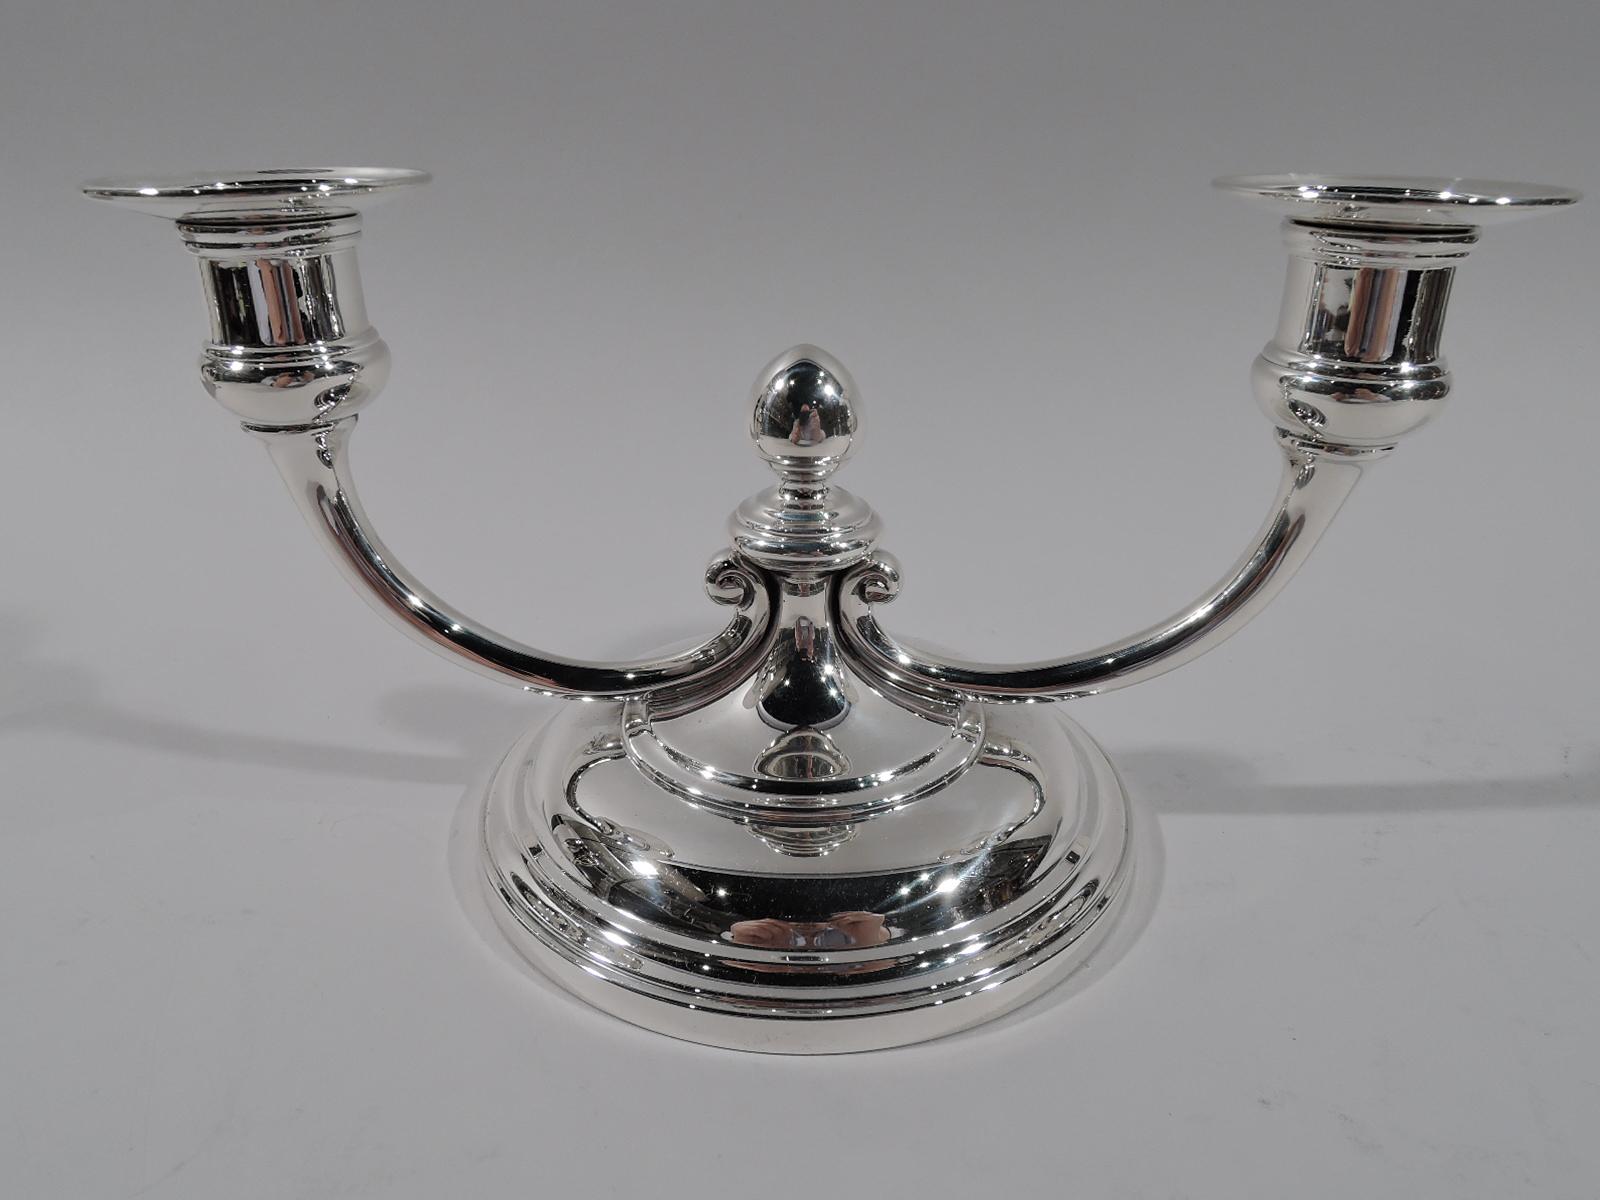 Pair of Art Deco sterling silver 2-light candelabra. Made by Tiffany & Co. in New York, ca 1928. Each: Large round and domed base with raised center terminating in acorn finial. Two low-slung c-scroll branches, each terminating in single bellied